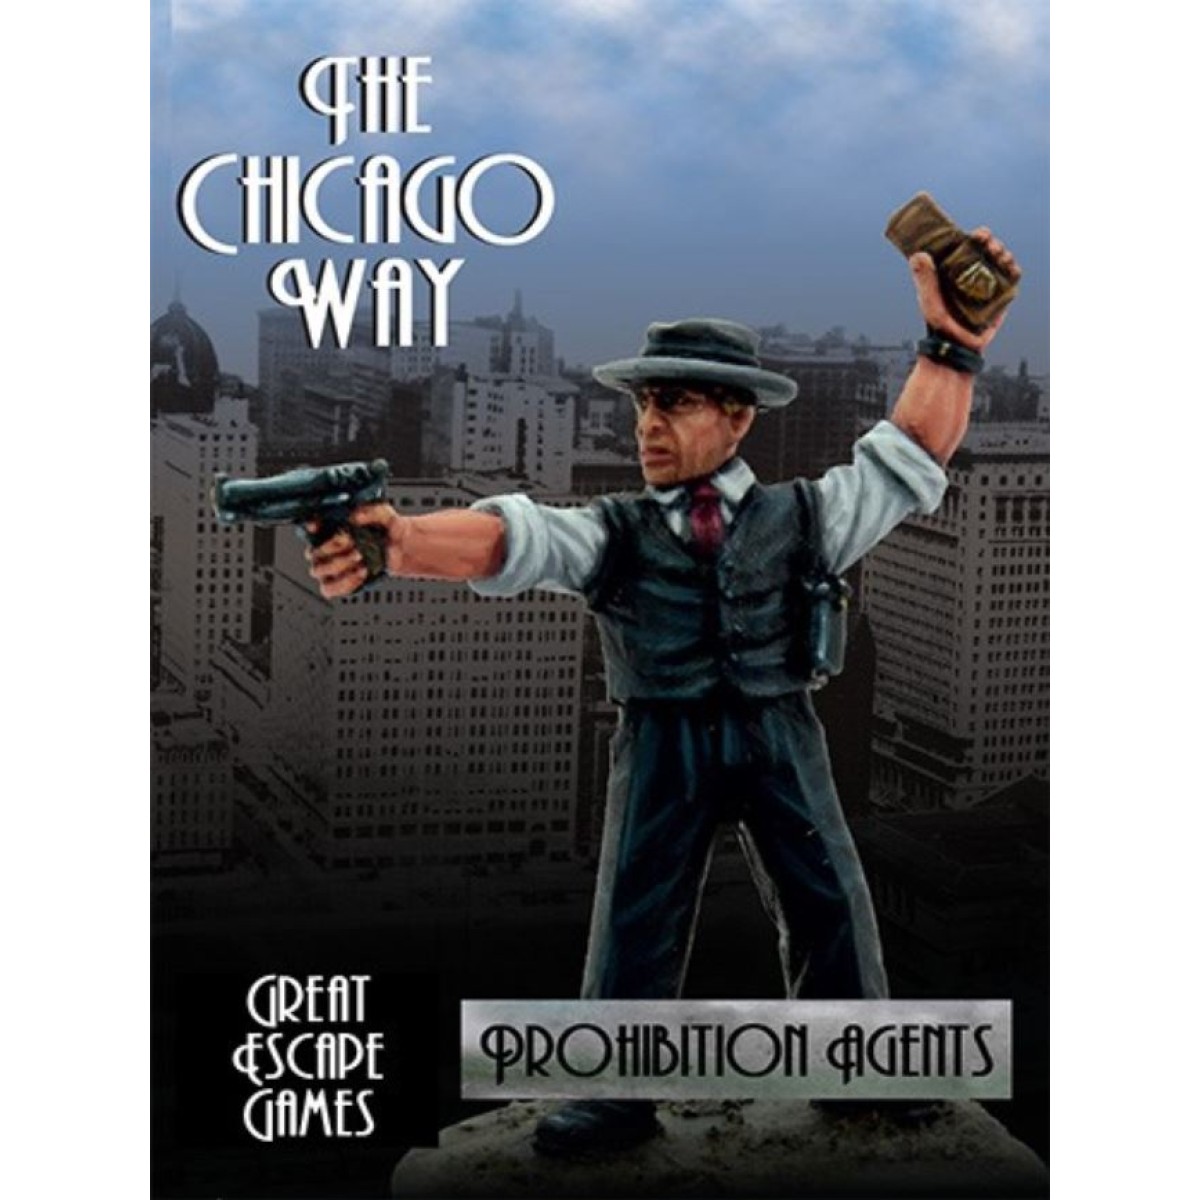 The Chicago way Great Escape Games 28mm Prohibition agents